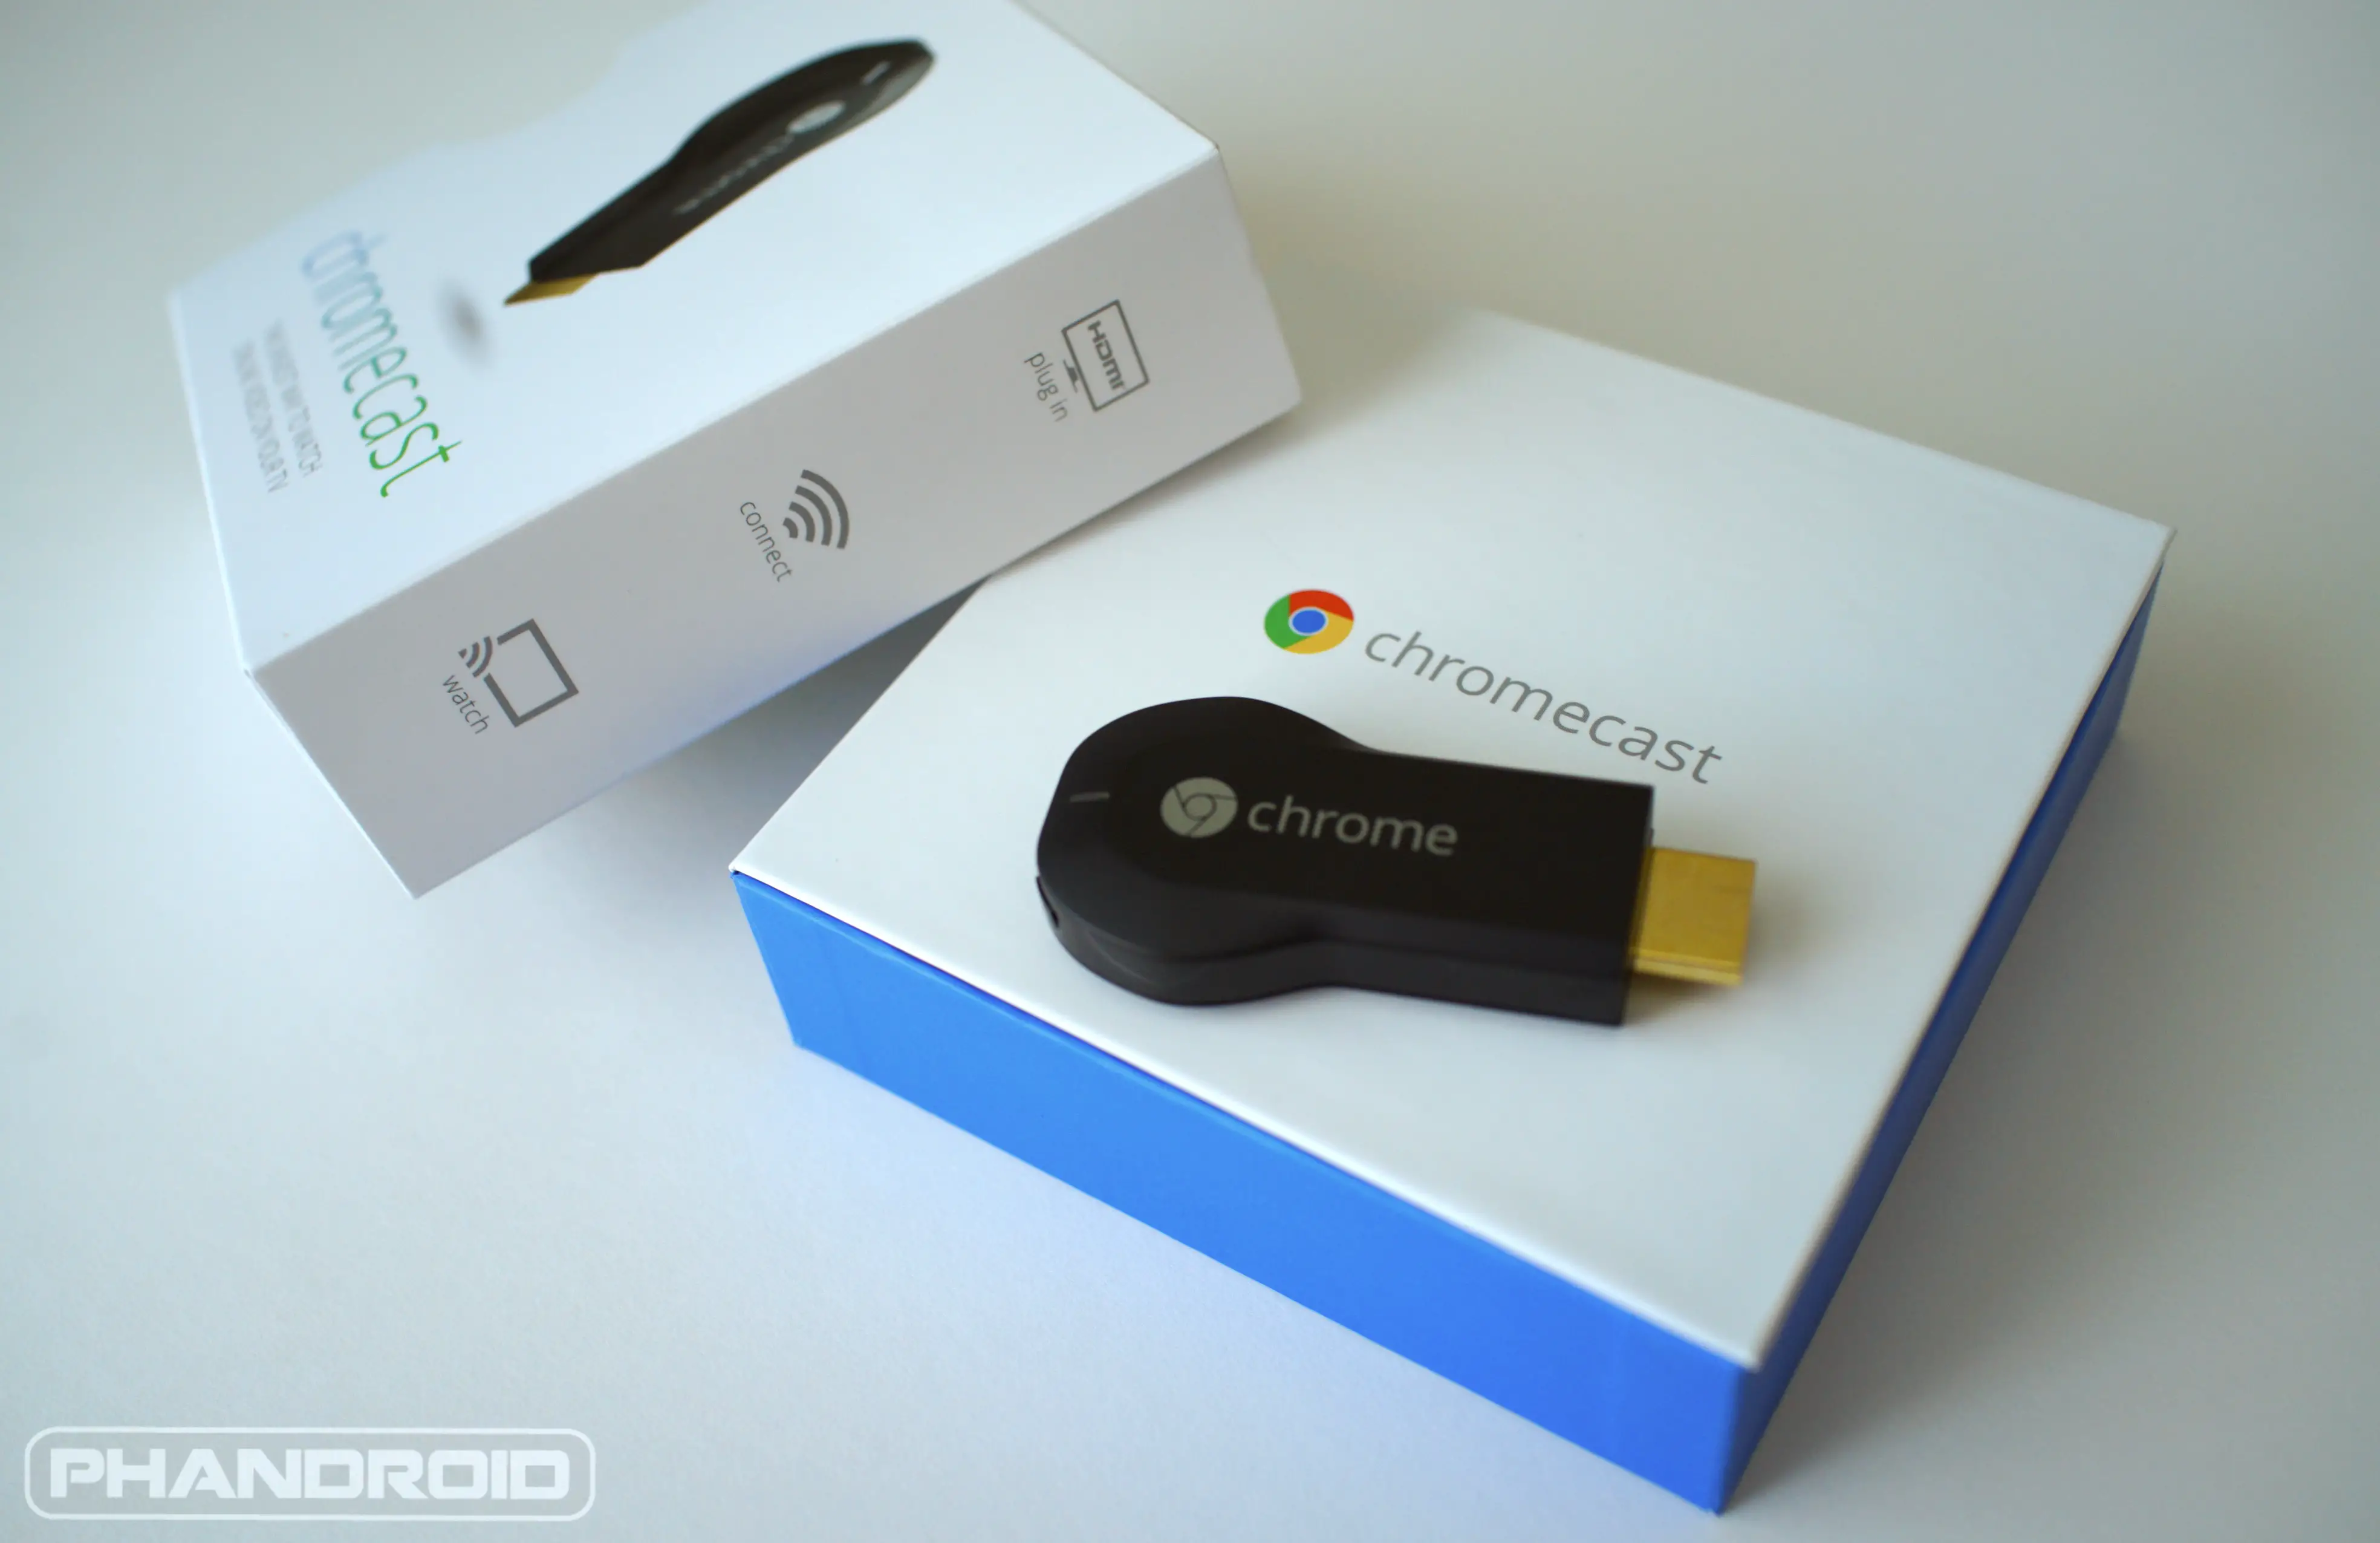 Google ends support for original Chromecast — see if you need to upgrade